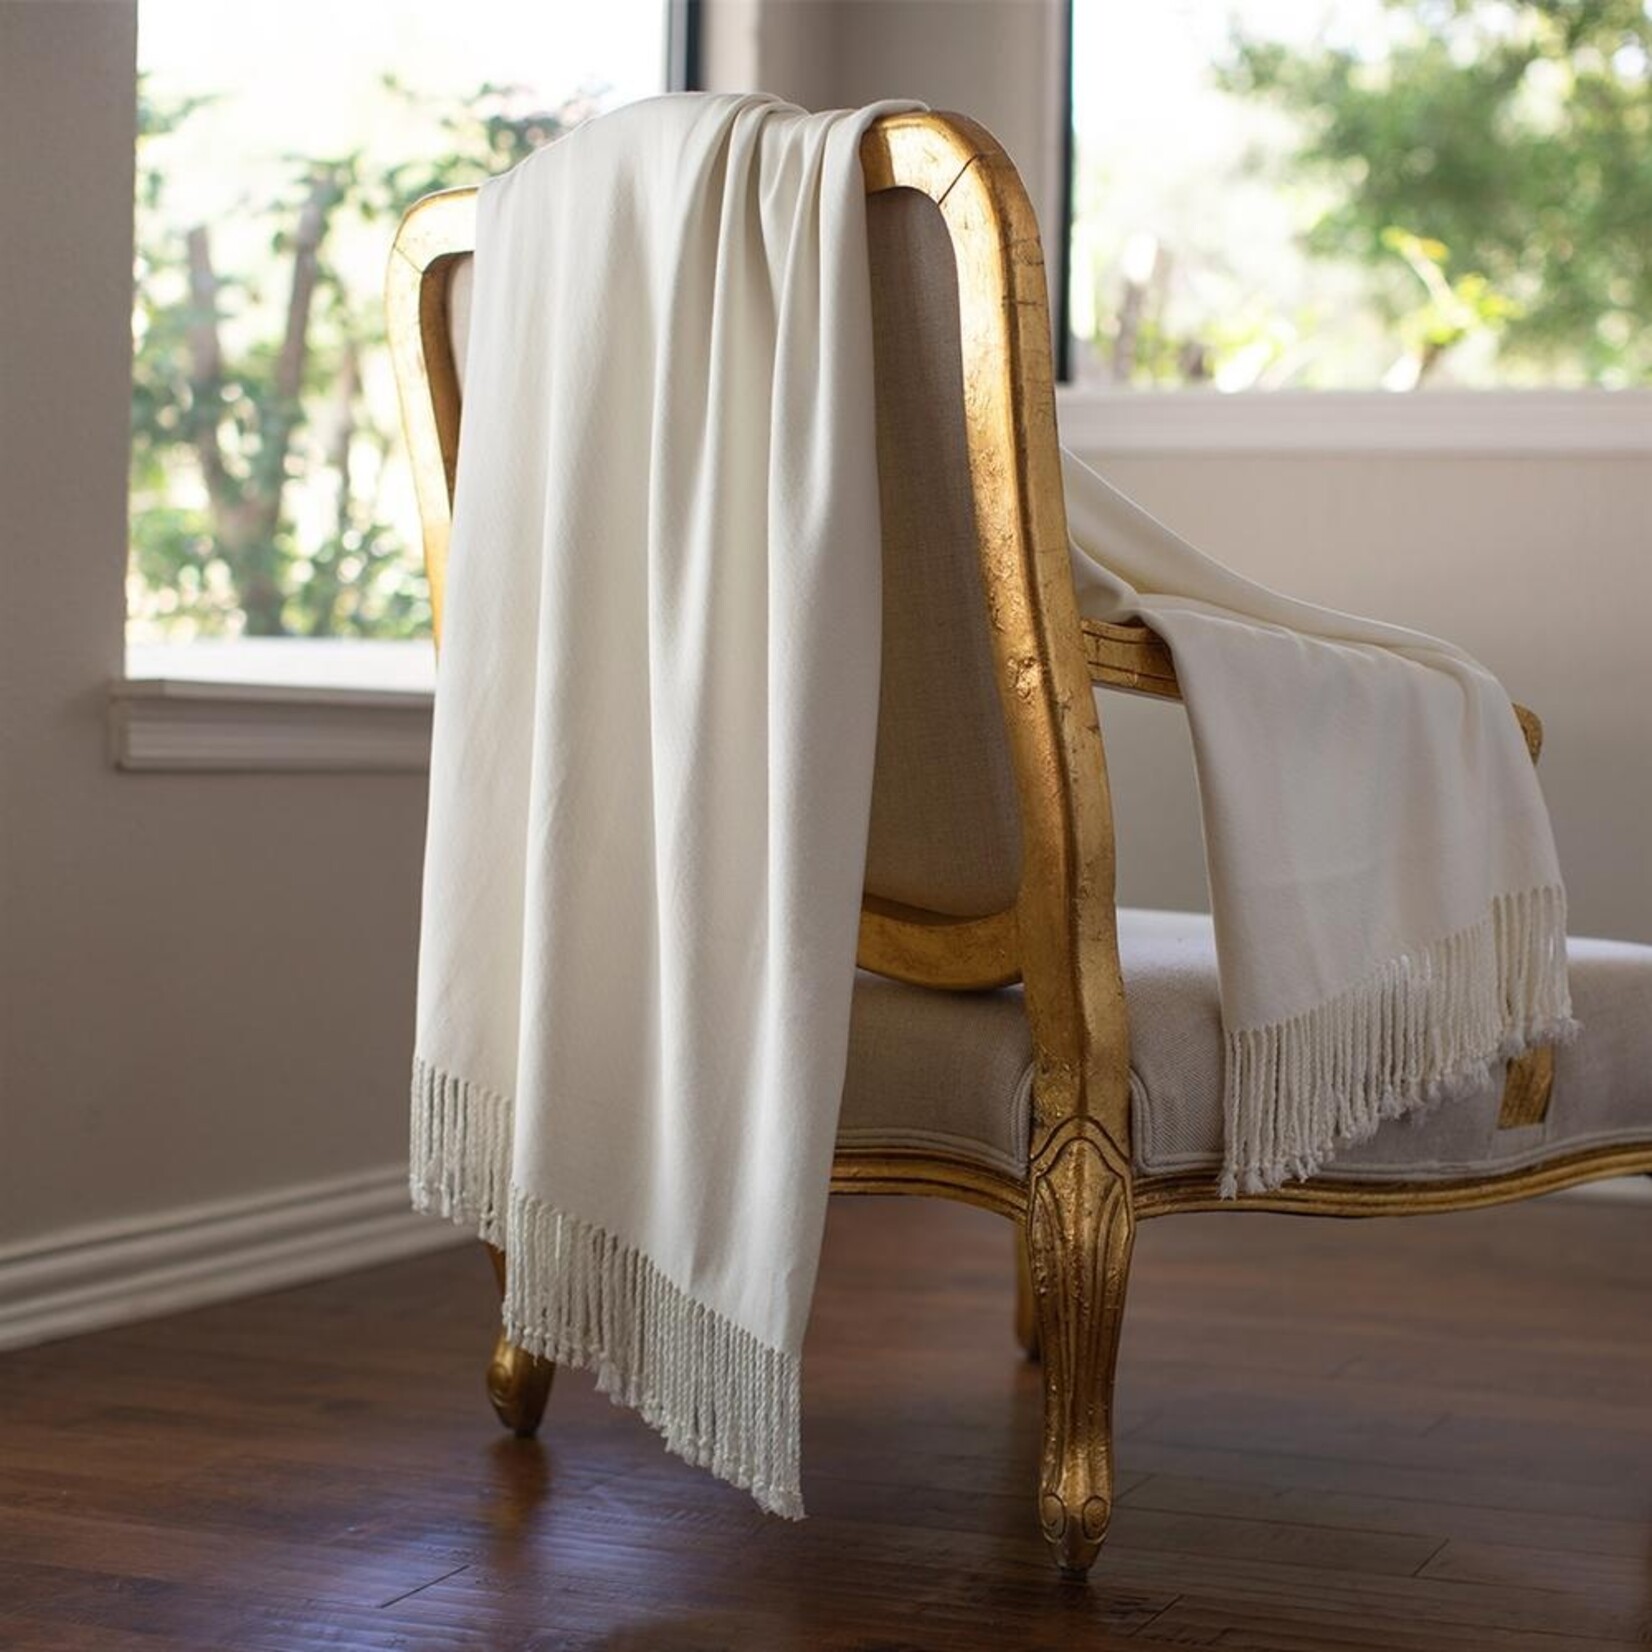 Pasha Throw Bamboo/Rayon with 4in Fringe 50x70